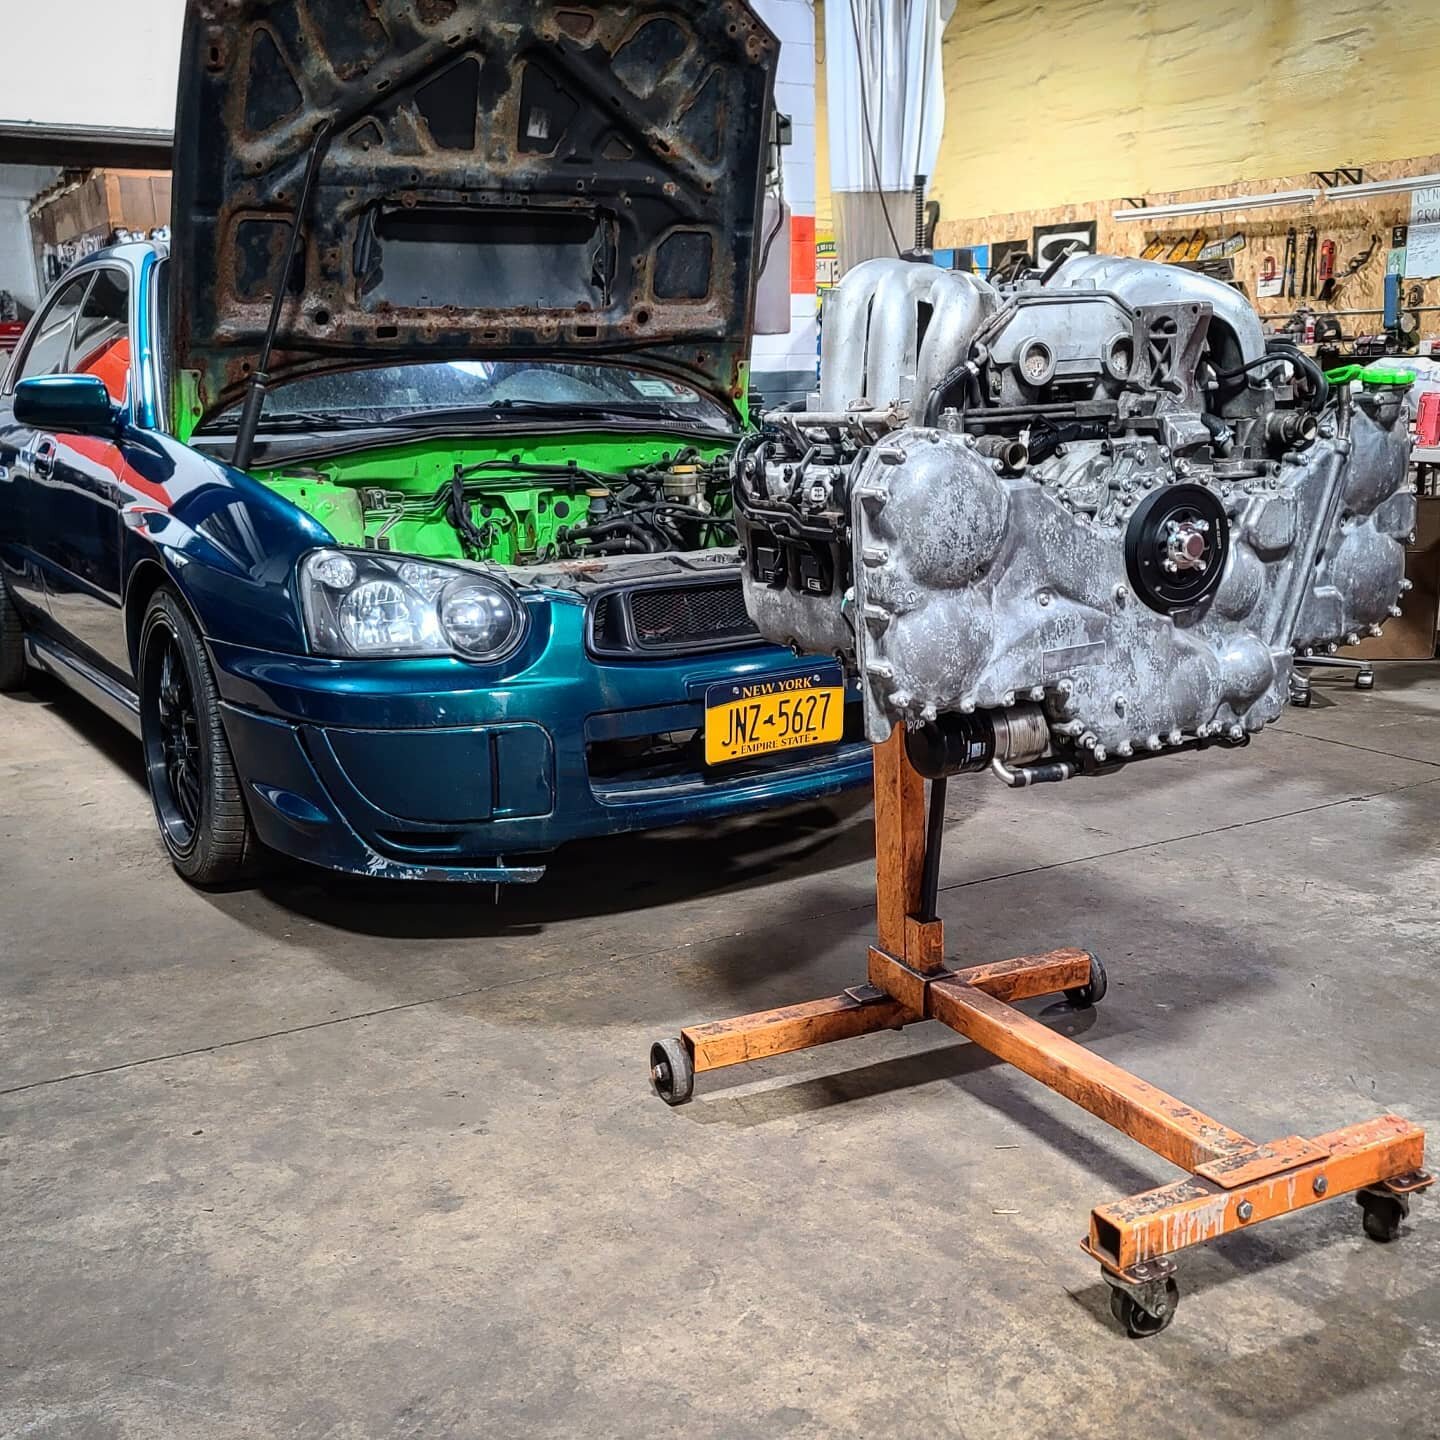 H6 EZ30 swapped Impreza with a refreshed engine going back together. Paired with a 5 speed, running a standalone ECU.
.
.
.
#subaru #impreza #H6 #swap #5mt #standalone #megasquirt #ecu #engine #refresh #ez30 #proudofboxer